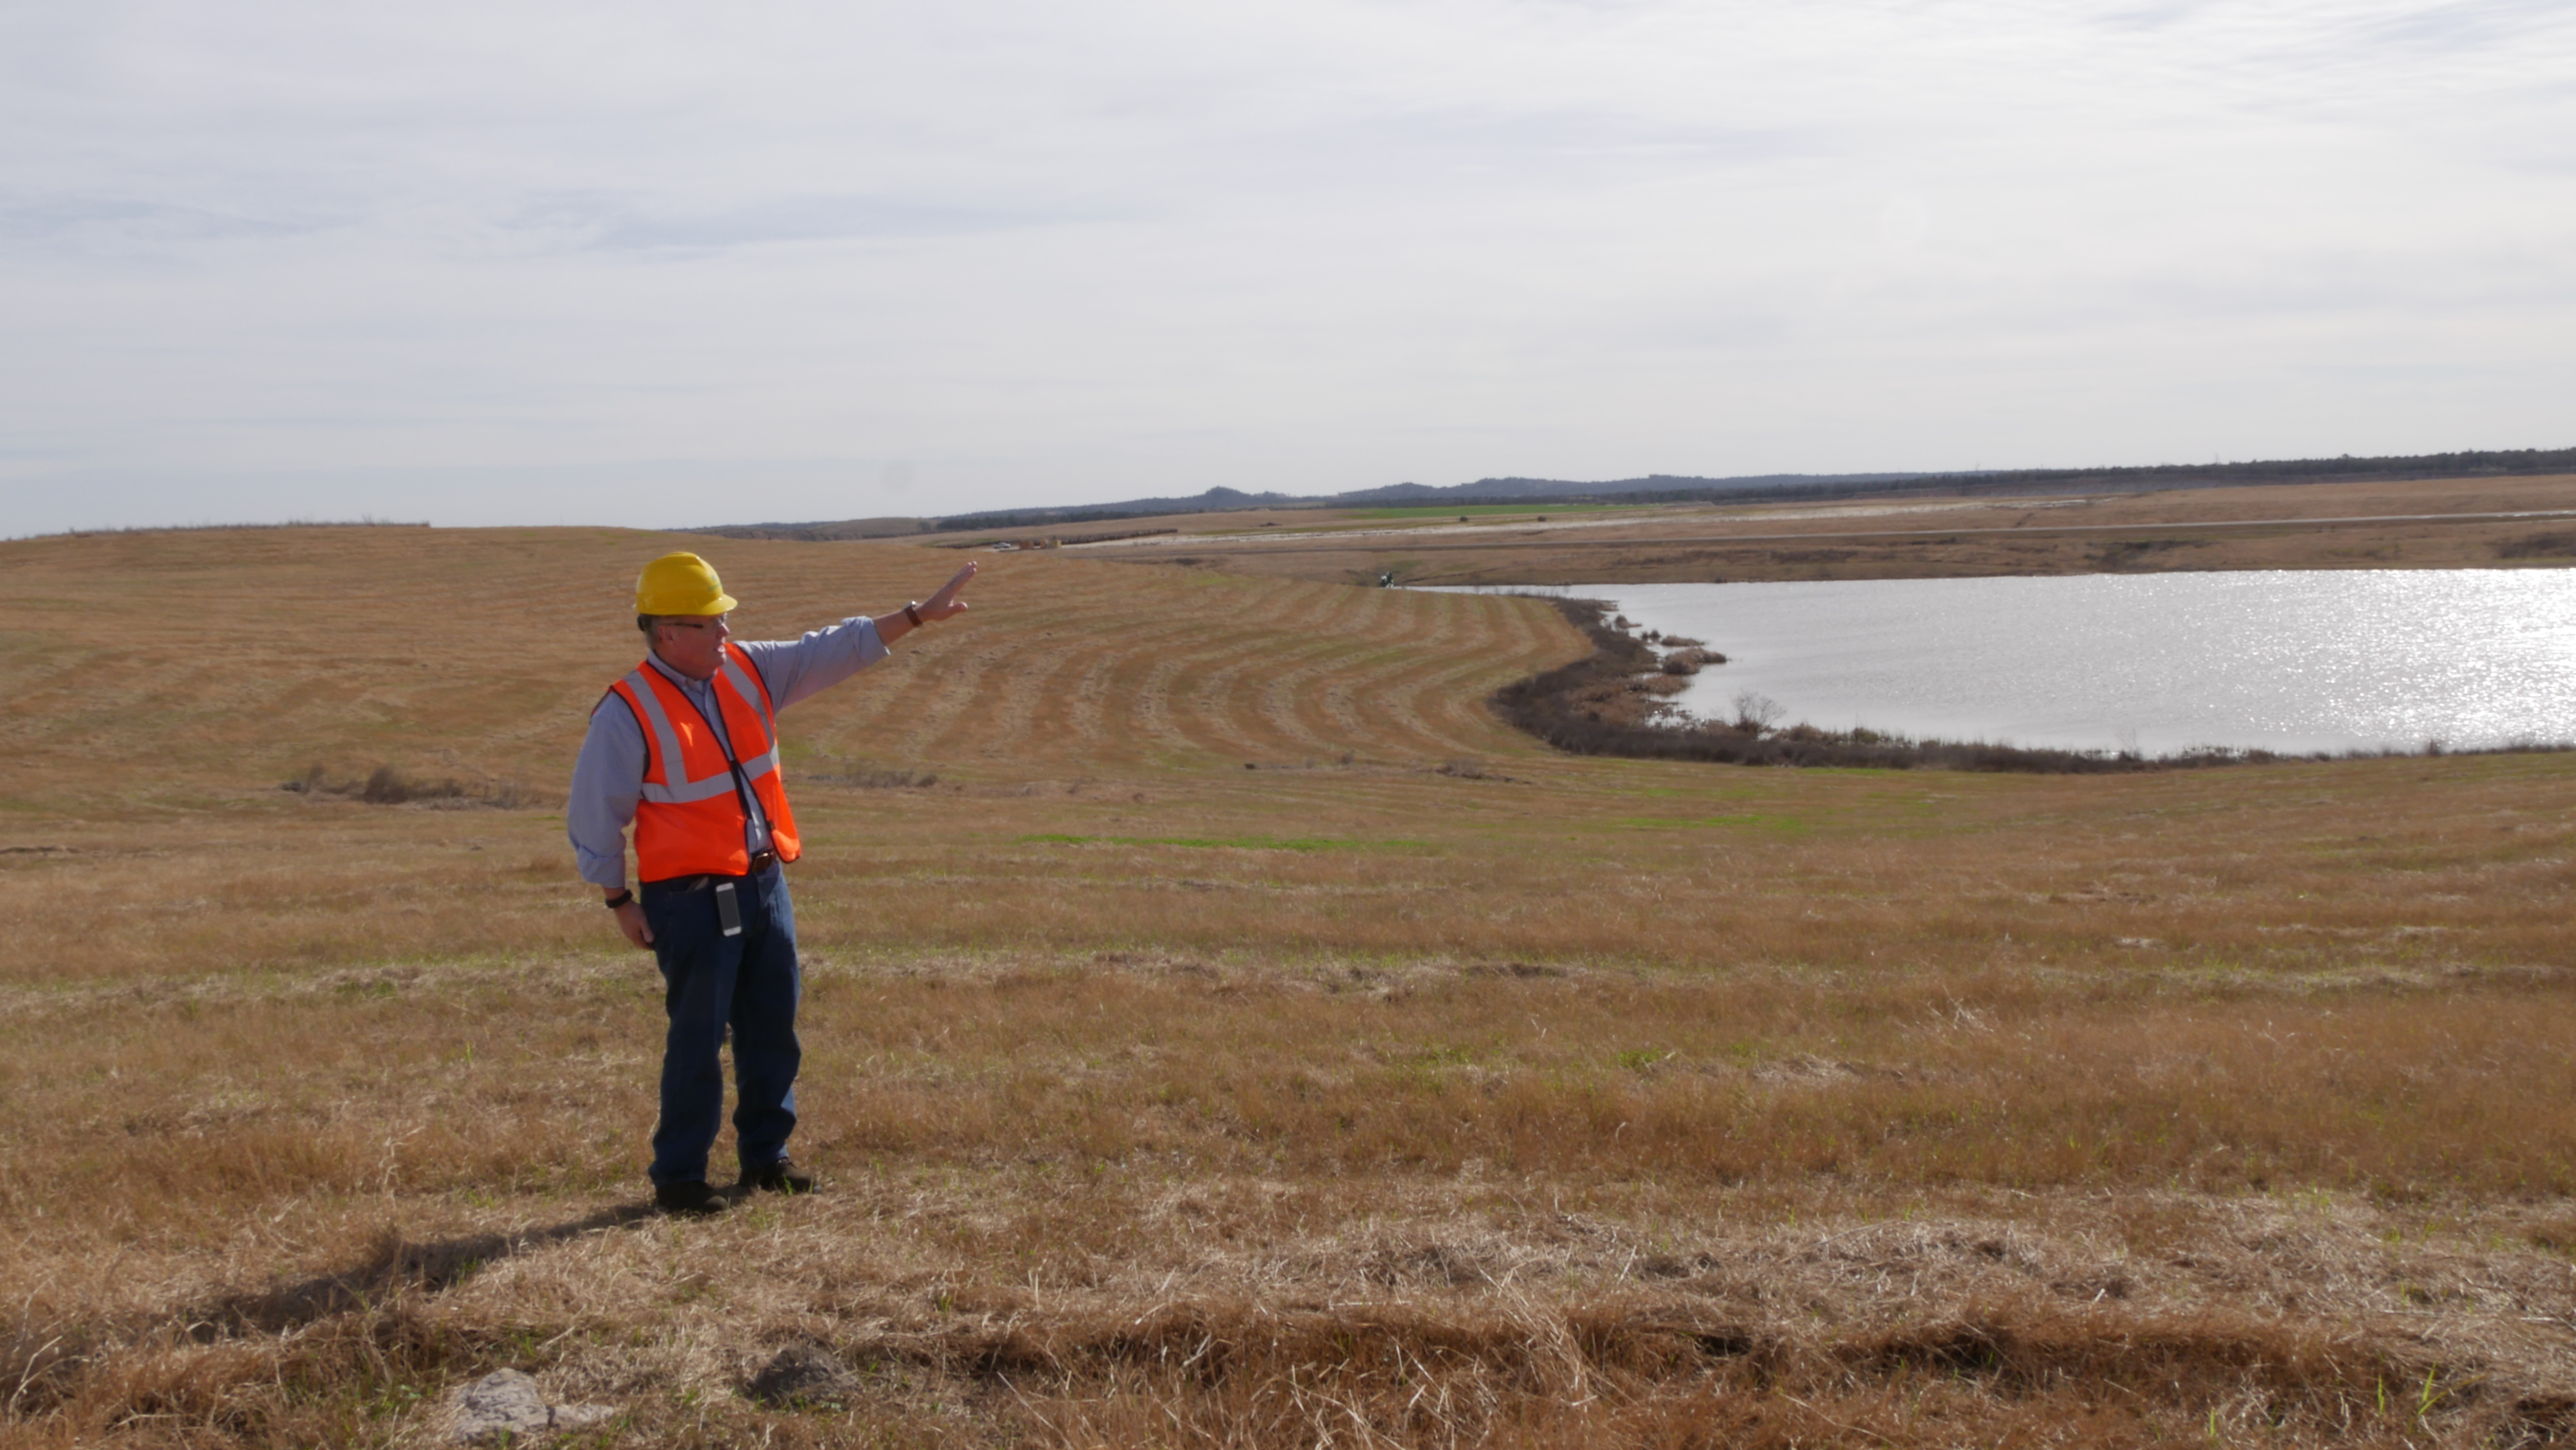 Commissioner Christian enjoys view of reclaimed surface mining site.